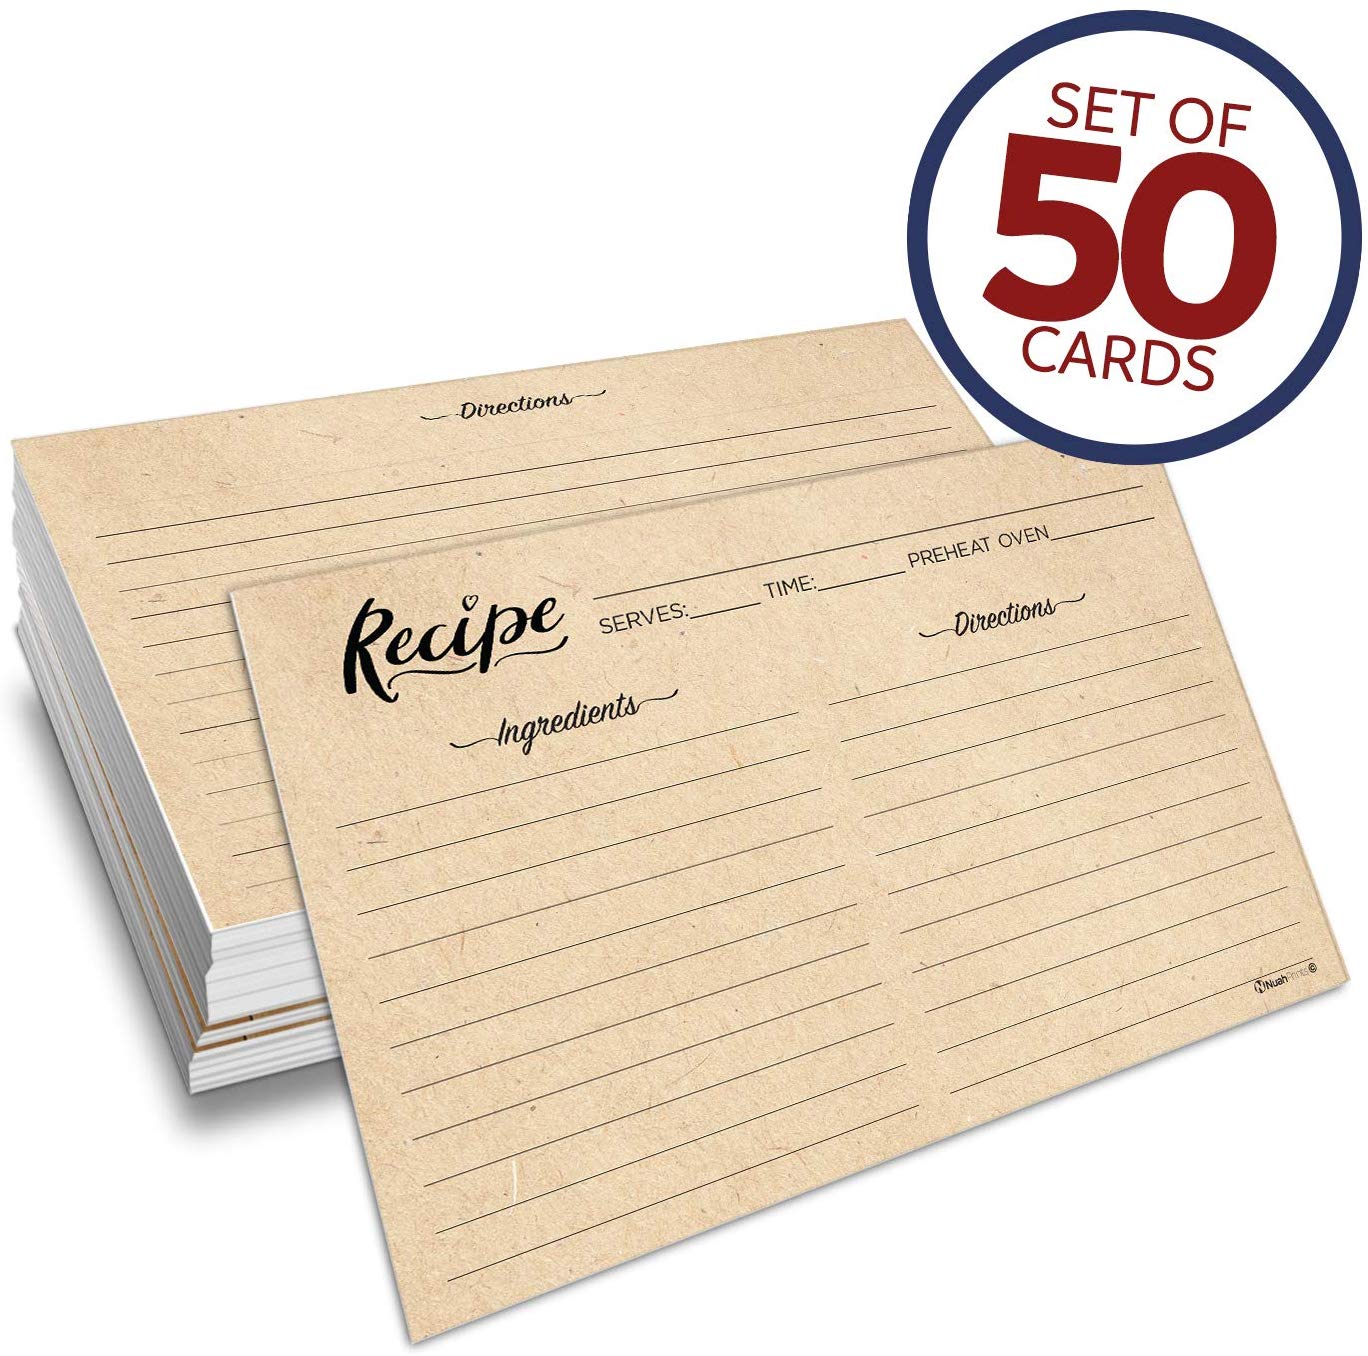 Nuah Prints Double Sided Recipe Cards 4x6 Inch, Set of 50 Thick Cardstock Recipe Cards with Lines, Easy To Write On Smooth Surface, Line Printed, Large...